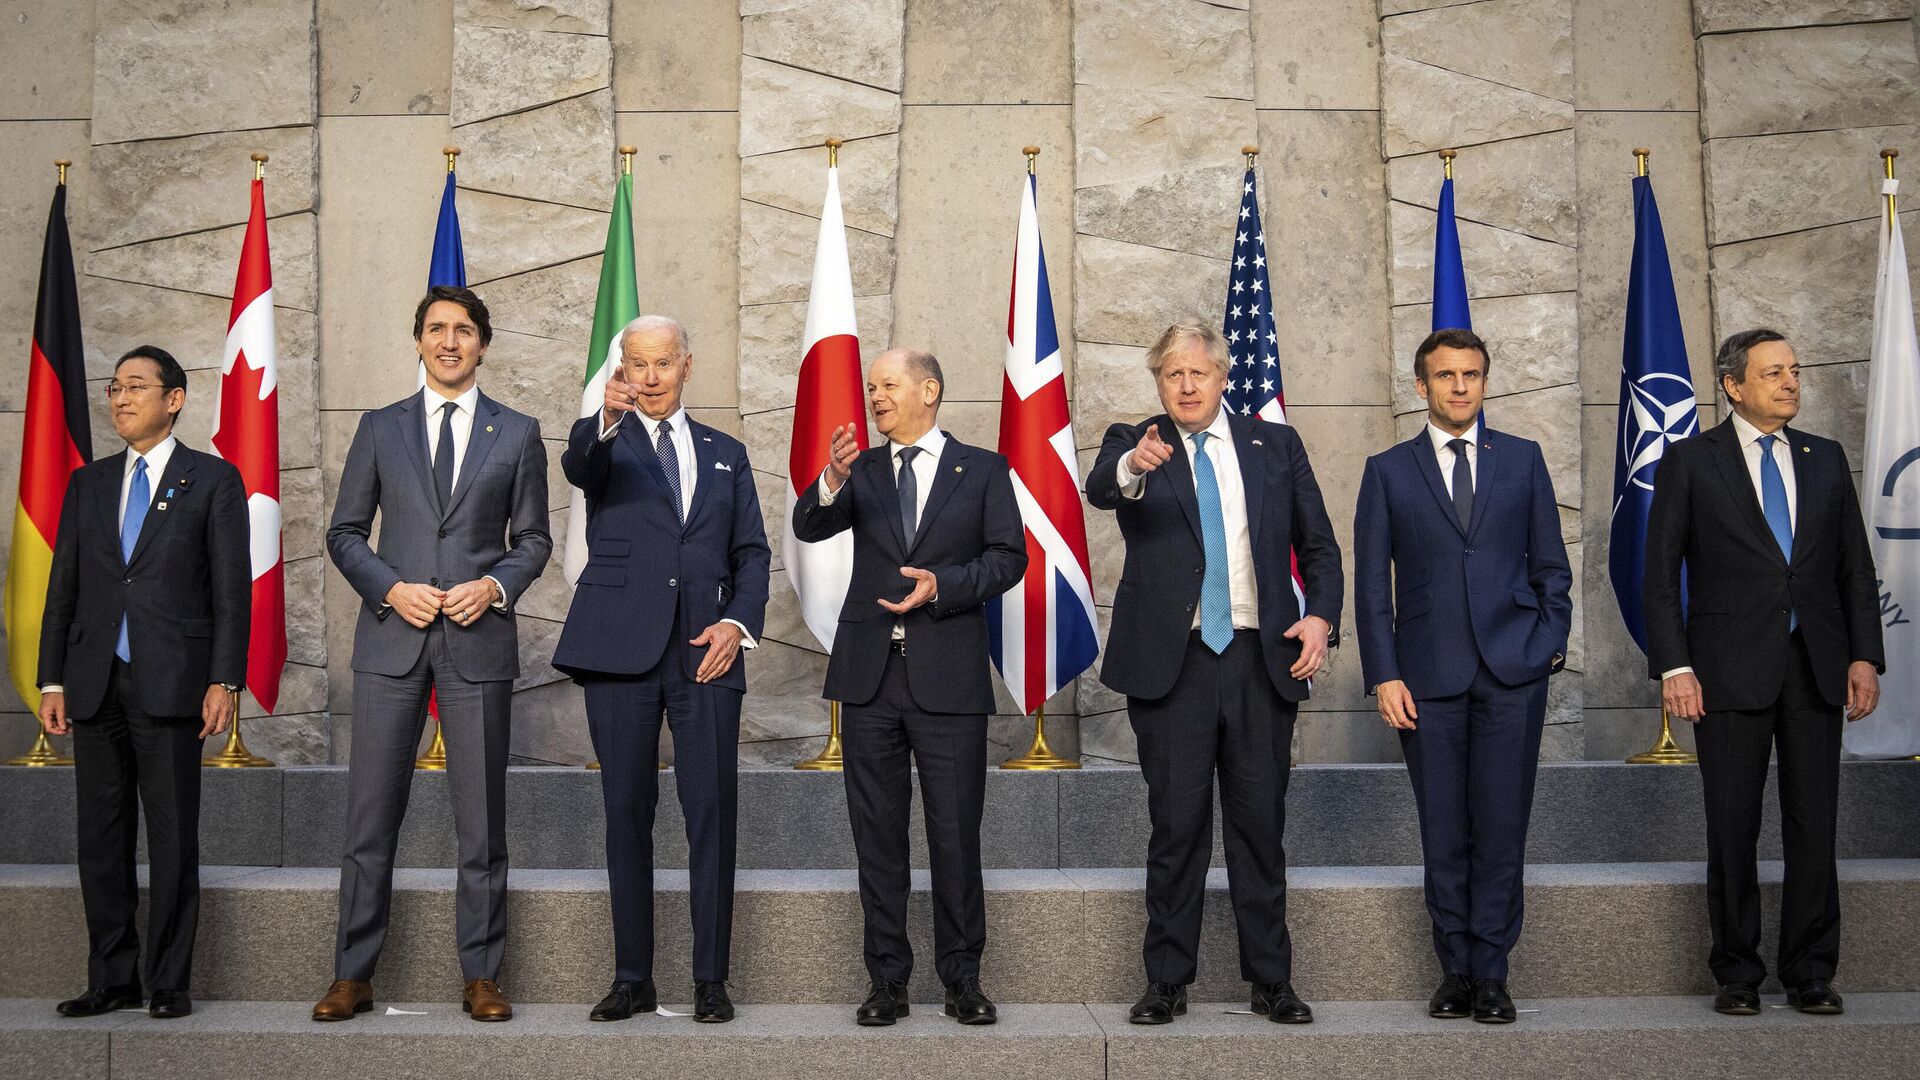 From left, Japan's Prime Minister Fumio Kishida, Canadian Prime Minister Justin Trudeau, U.S. President Joe Biden, German Chancellor Olaf Scholz, British Prime Minister Boris Johnson, French President Emmanuel Macron and Italian Prime Minister Mario Draghi pose for a group photo during an extraordinary NATO summit at NATO headquarters in Brussels, Belgium, Thursday, March 24, 2022. - Sputnik International, 1920, 31.03.2022